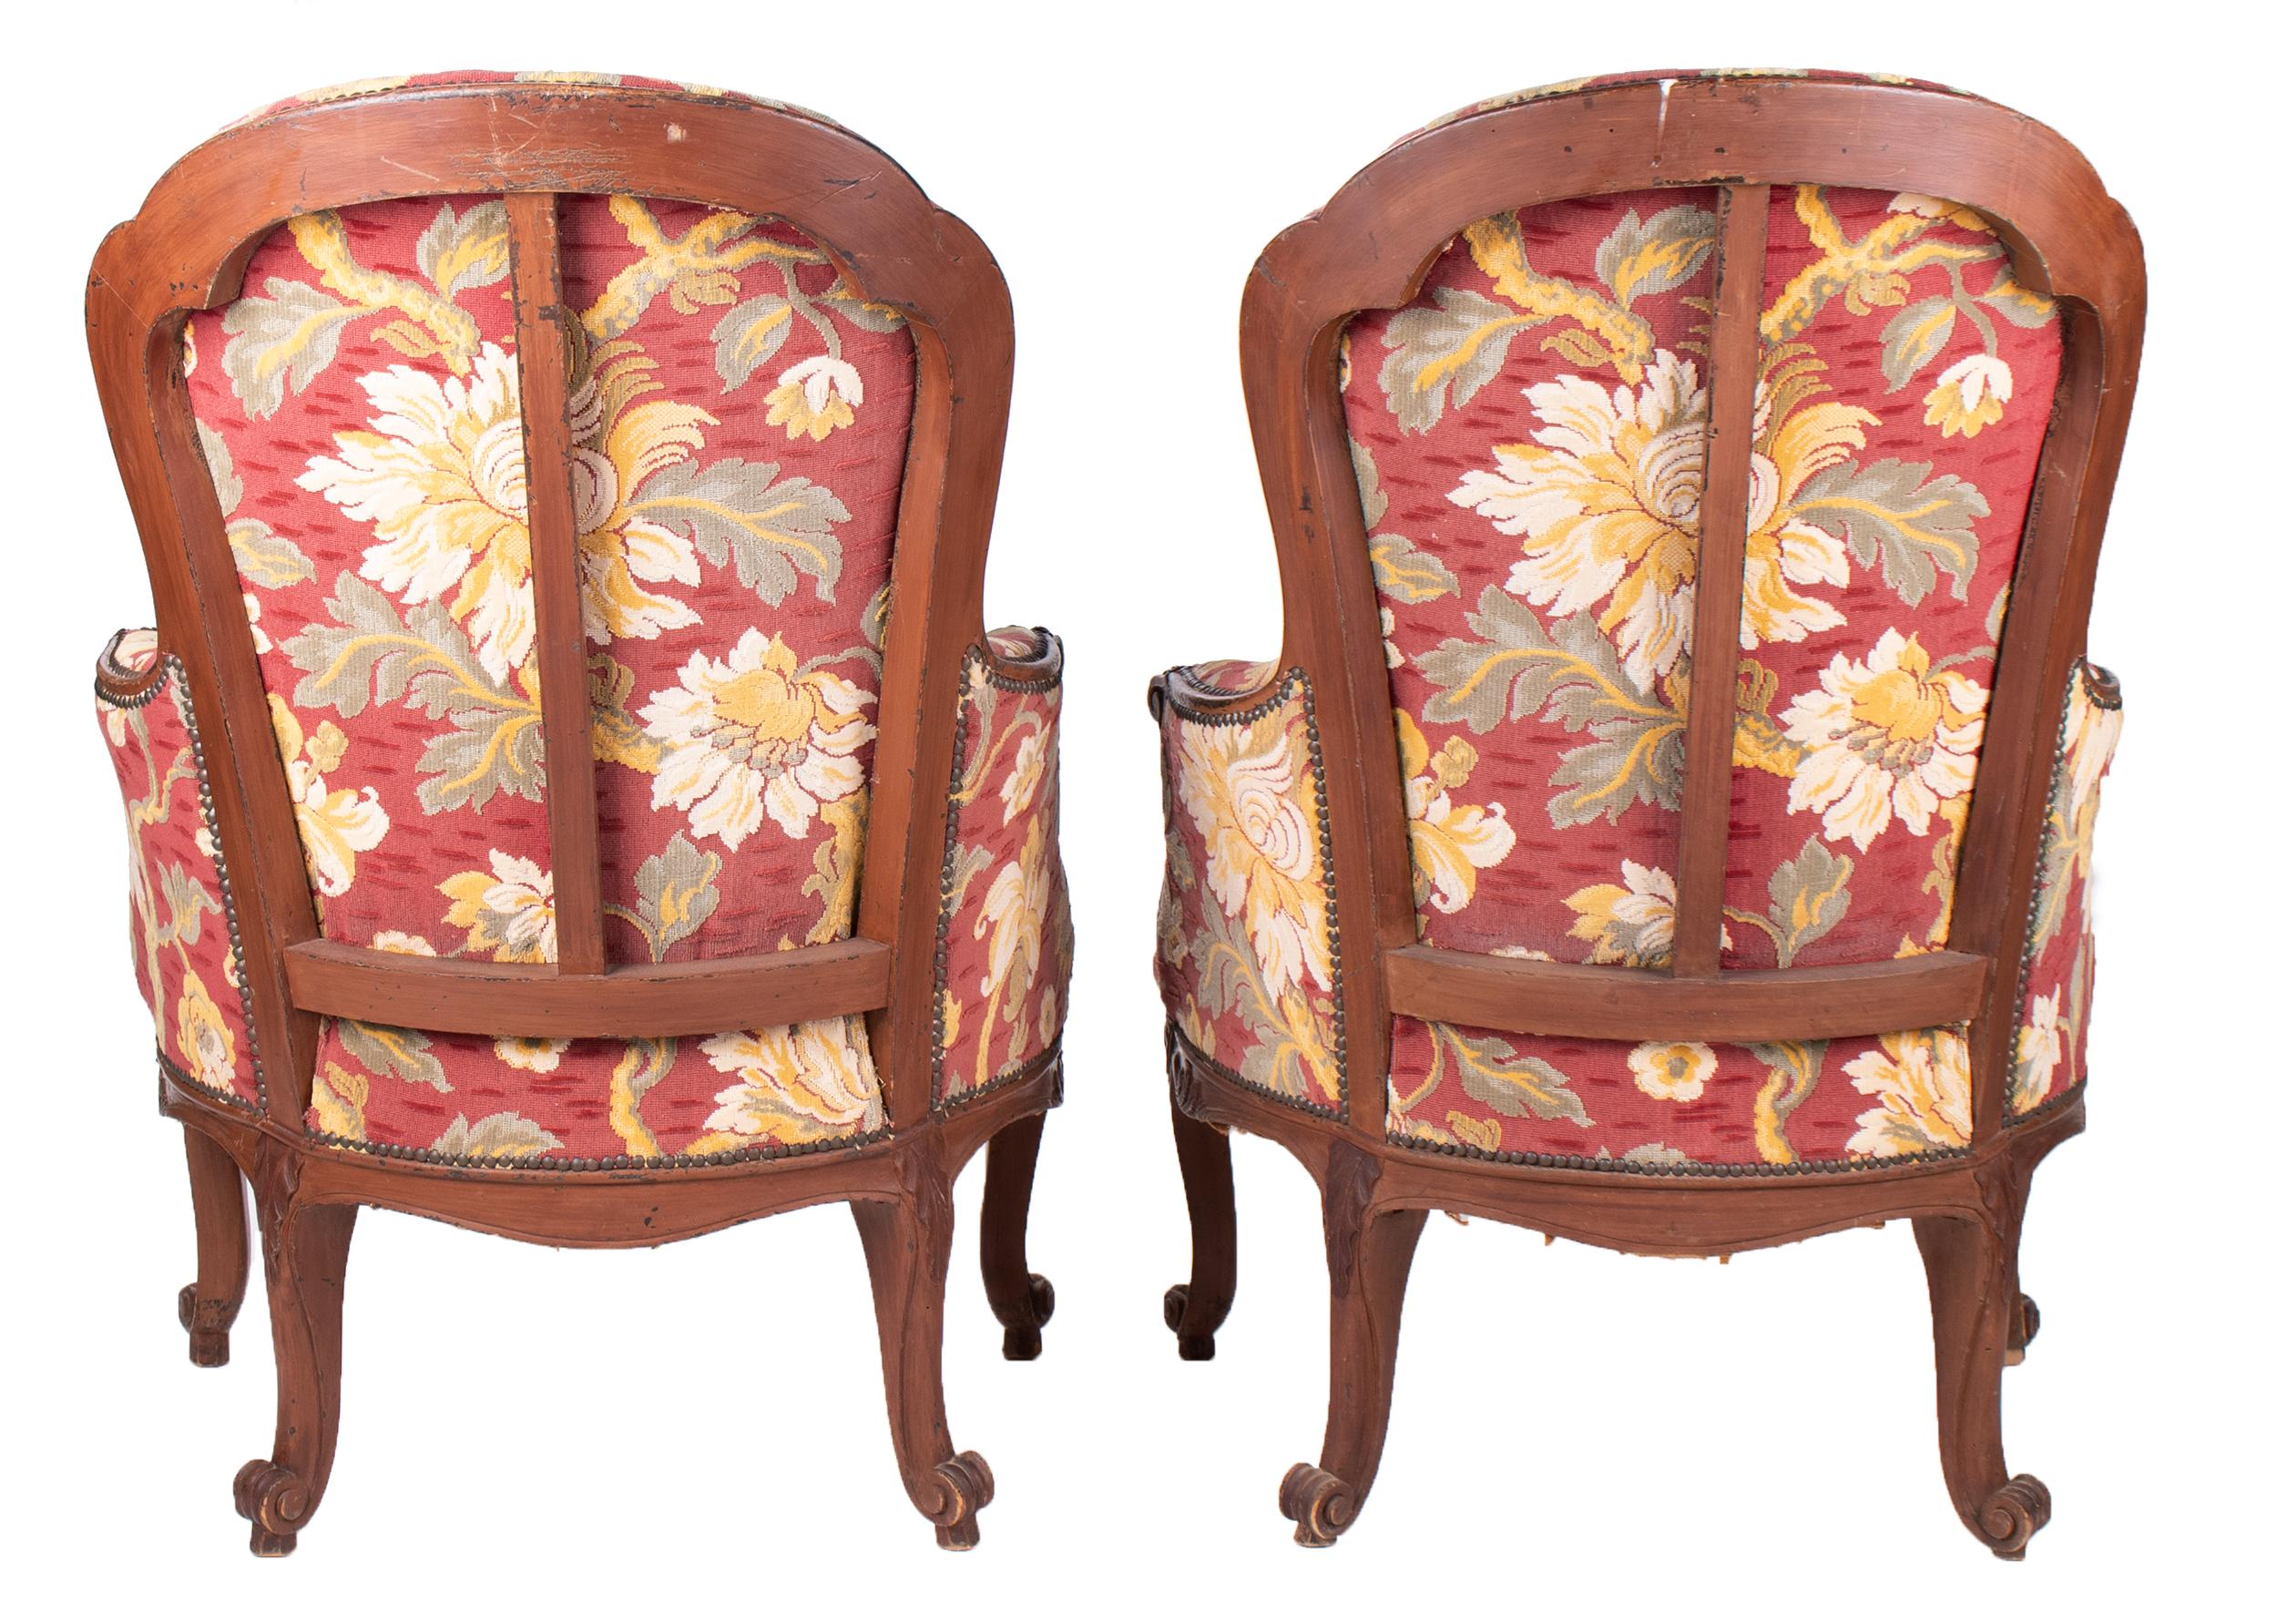 20th Century 19th Century Pair of French Floral Upholstered Chairs For Sale